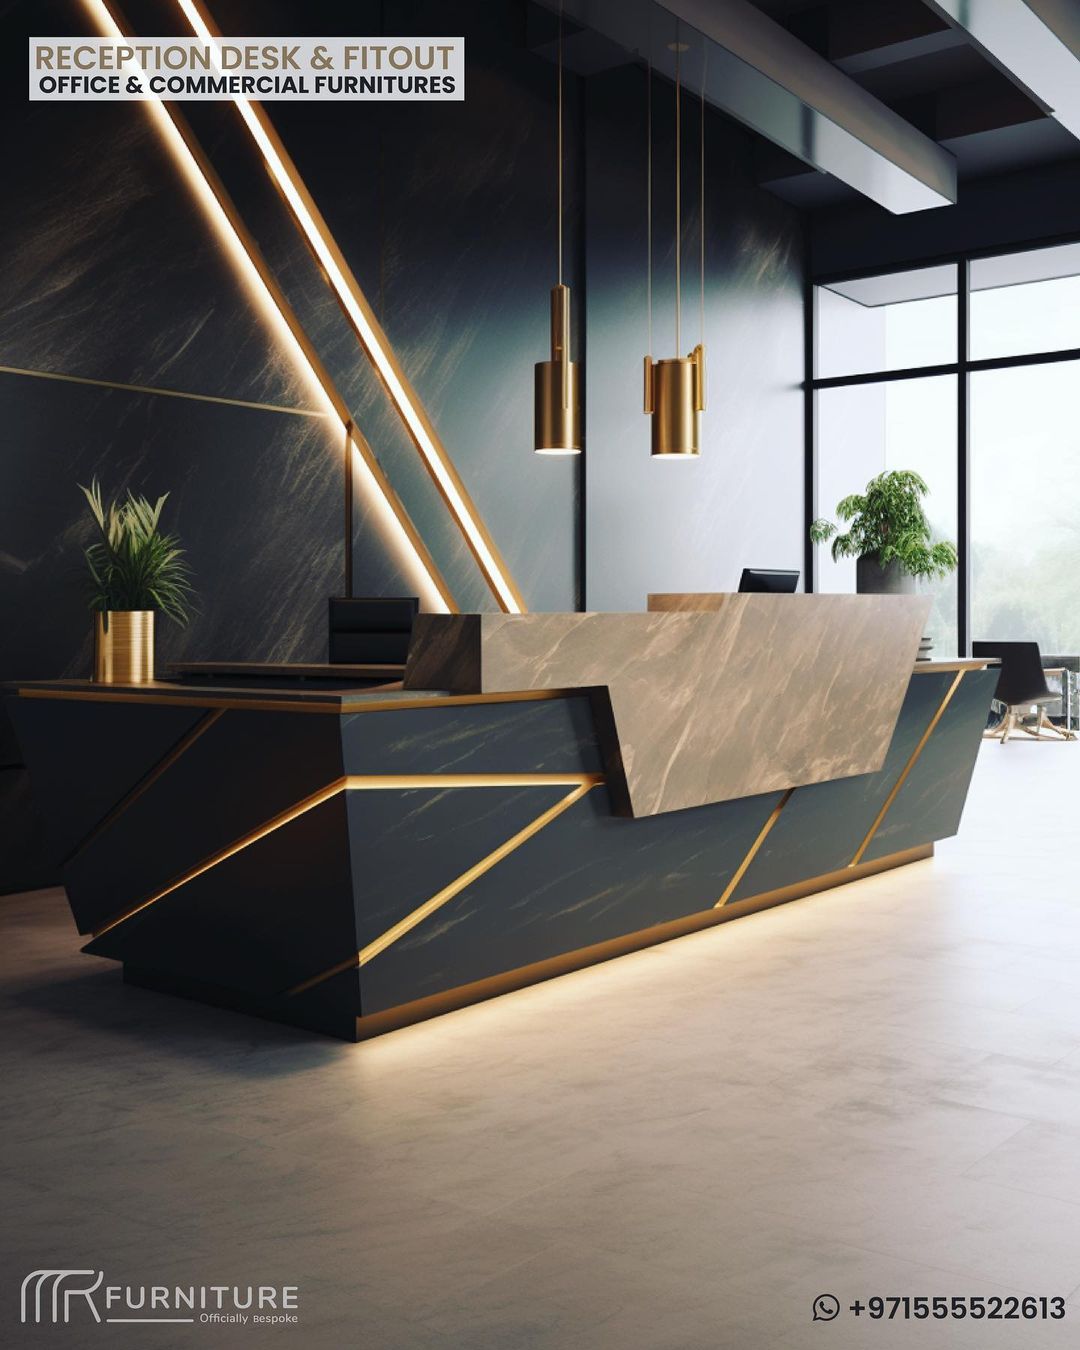 The Impact of a Quality Reception Desk on The Office Atmosphere